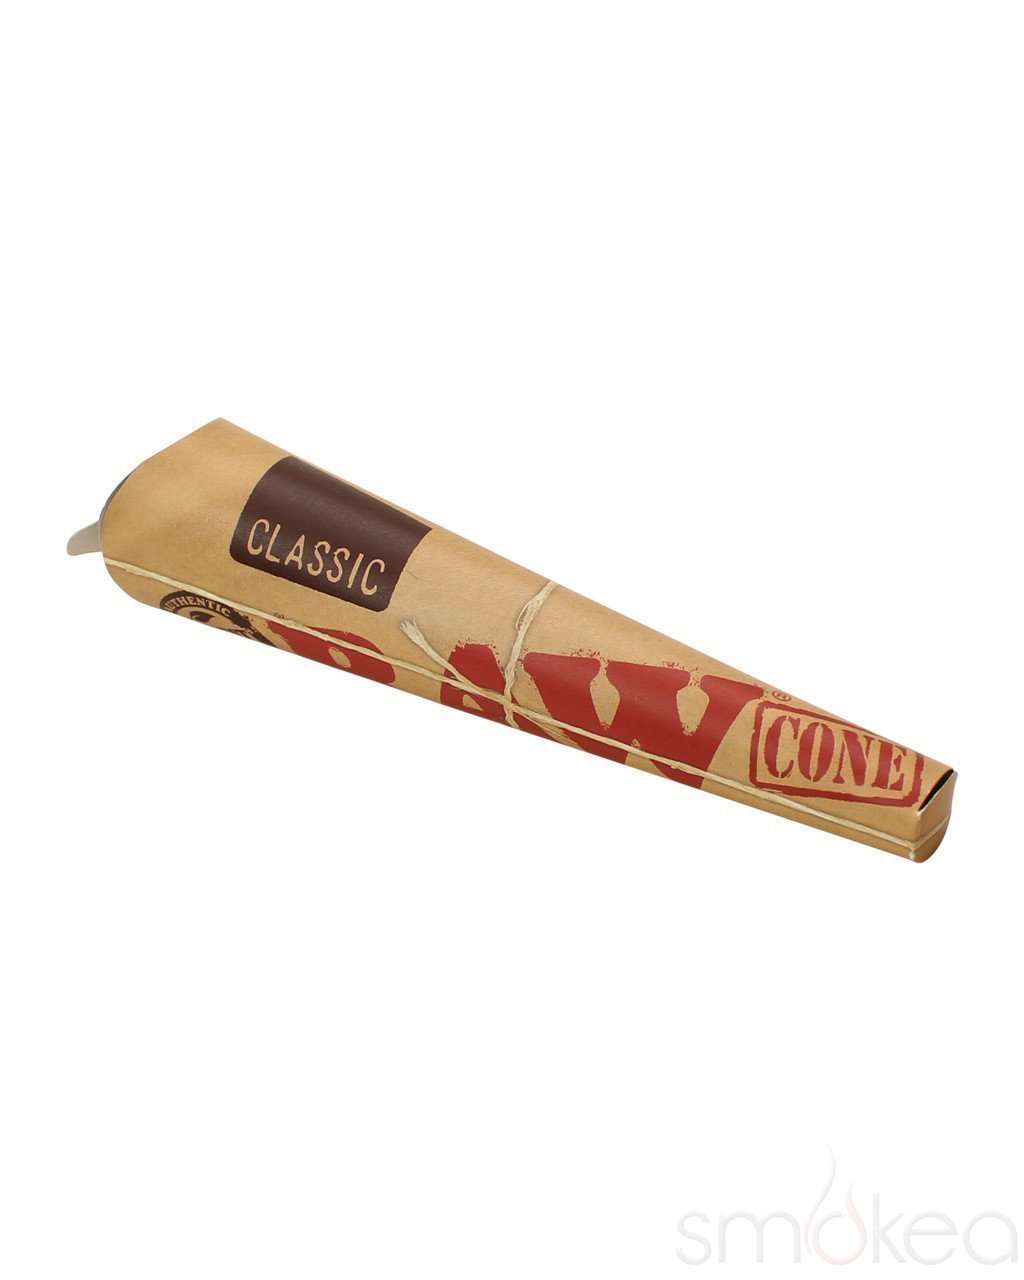 Raw Classic 1 1/4 Pre-Rolled Cones (1-Pack) - Bittchaser Smoke Shop